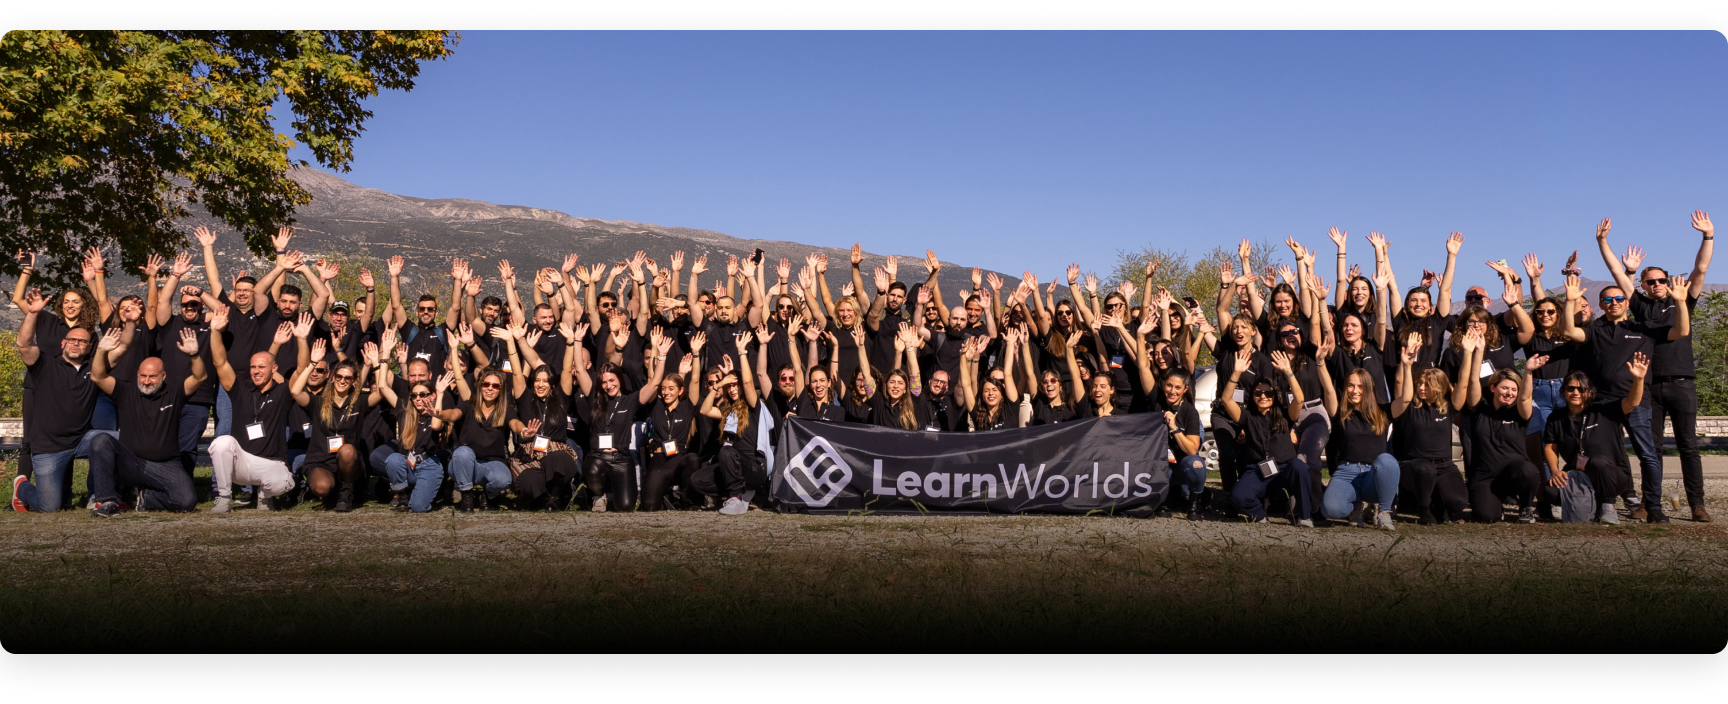 The team of LearnWorlds posing for a picture, more than 100 people that build the world's top course platform at the company retreat.